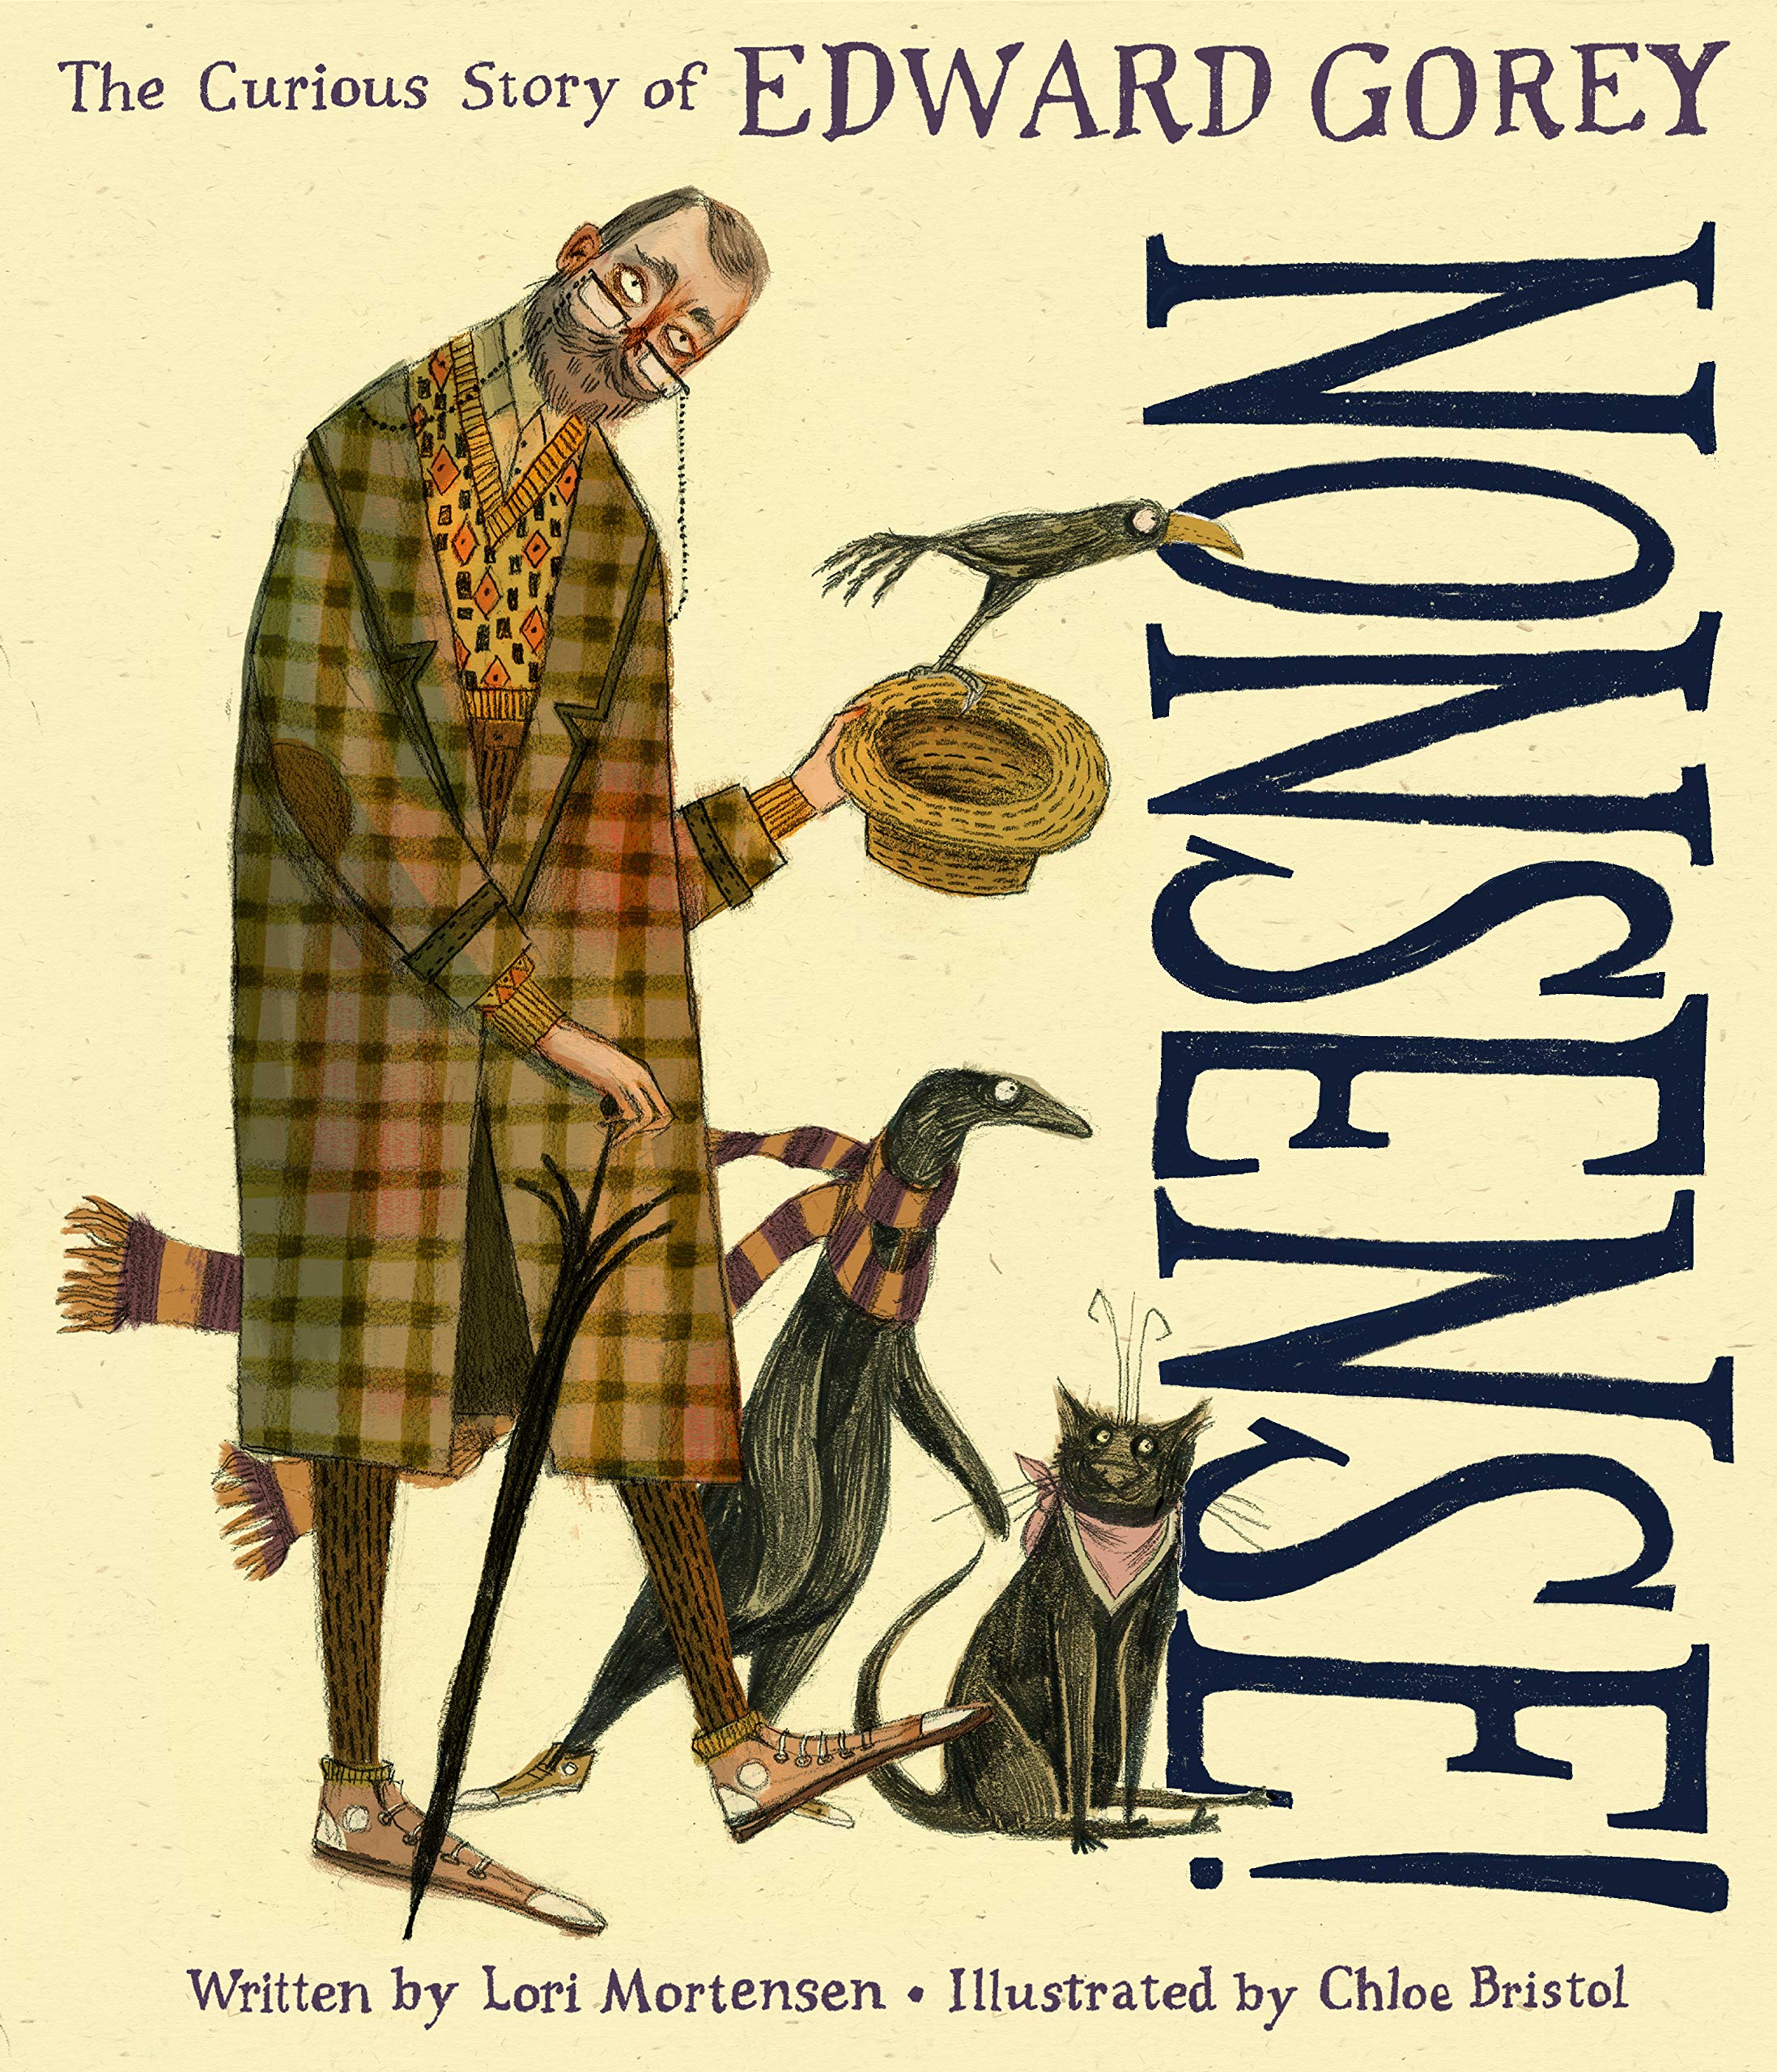 Nonsense! The Curious Story of Edward Gorey: The Curious Story of Edward Gorey